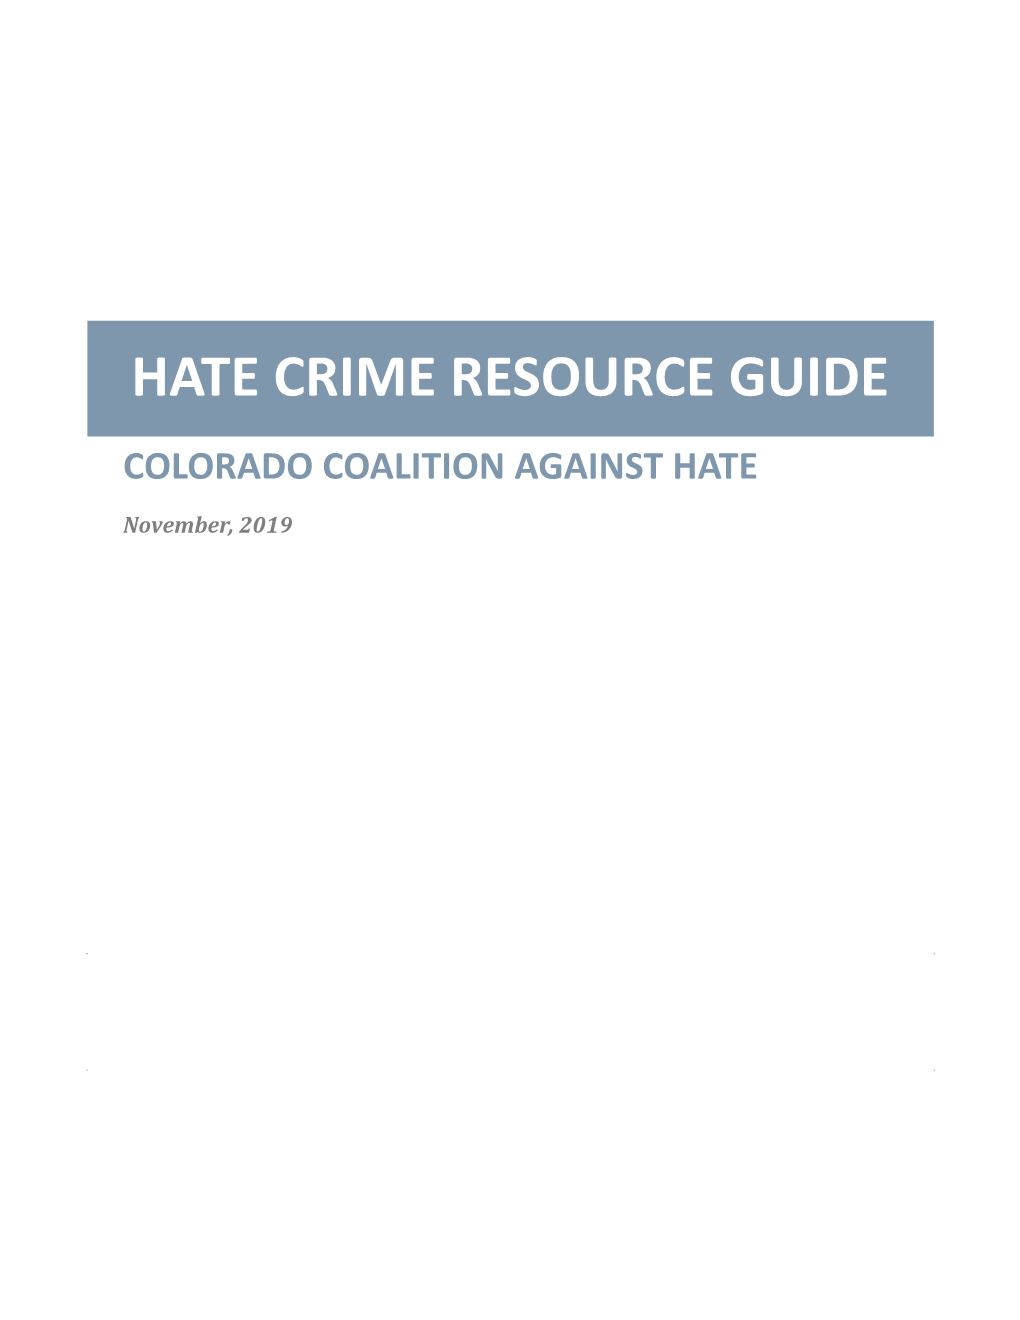 Hate Crime Resource Guide Colorado Coalition Against Hate